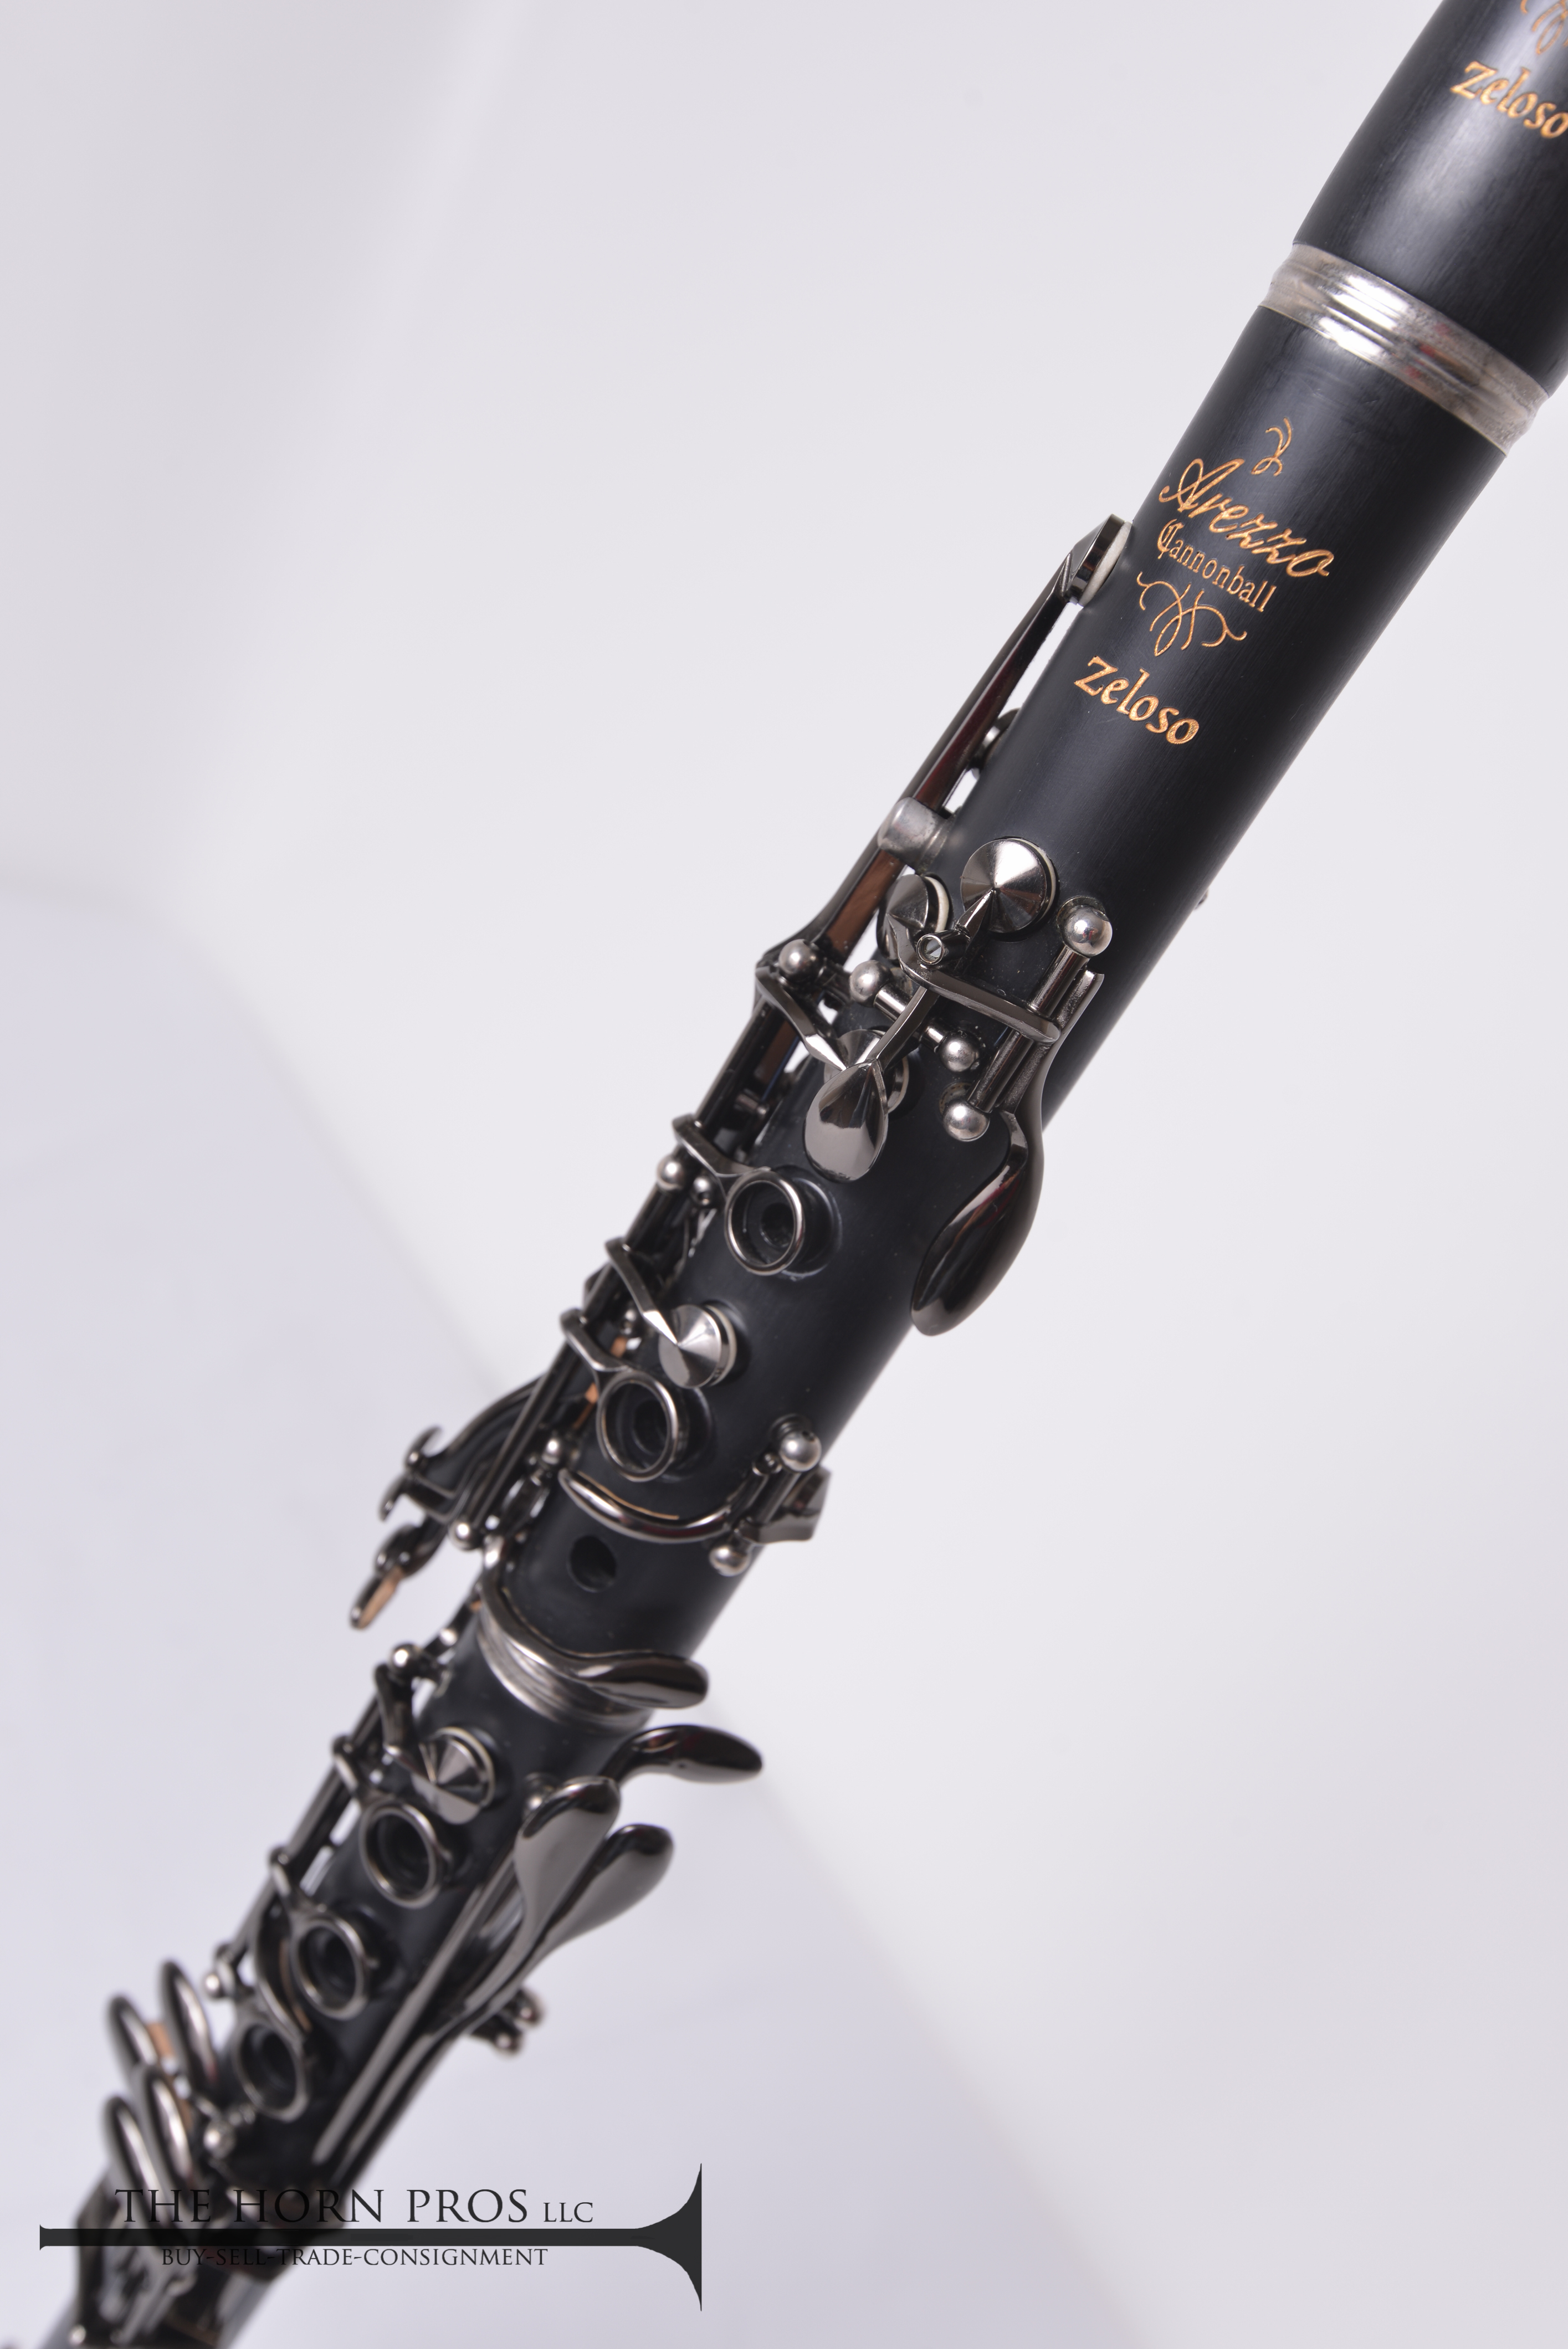 Cannonball Zeloso Clarinet $285 SOLD - The Horn Pros